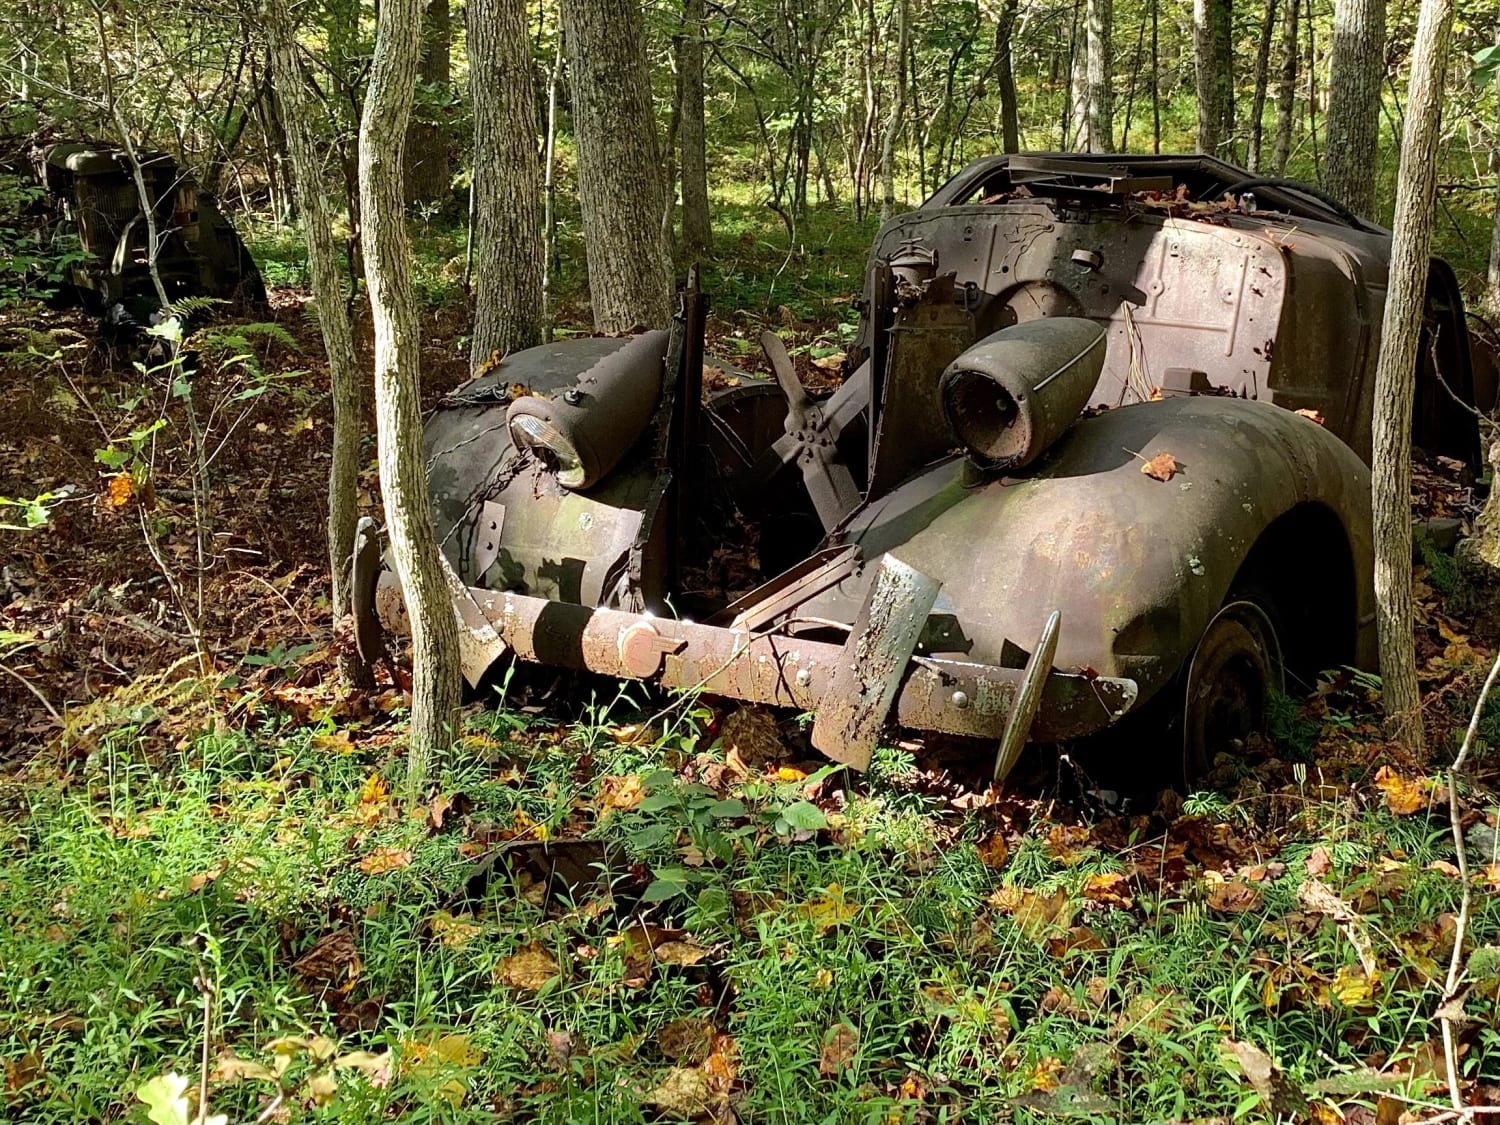 Late 30s Pontiac left in the woods a half mile from any road. I wonder how it got there.